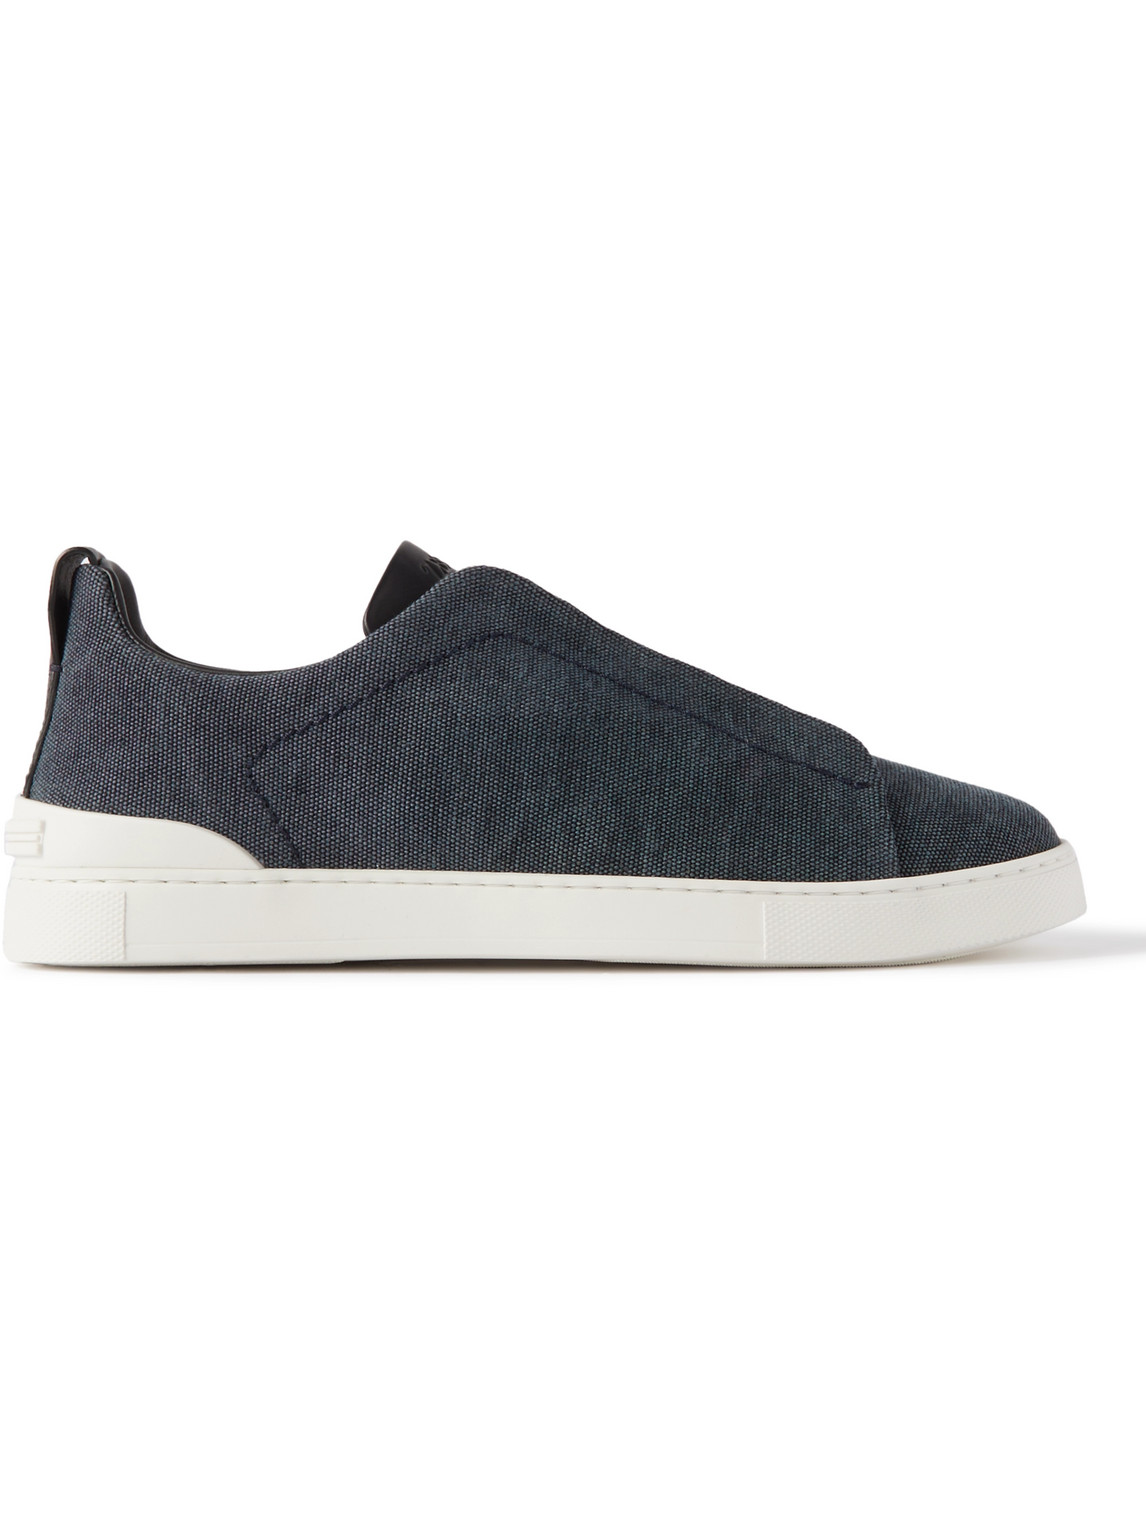 ZEGNA LEATHER-TRIMMED CANVAS SLIP-ON SNEAKERS